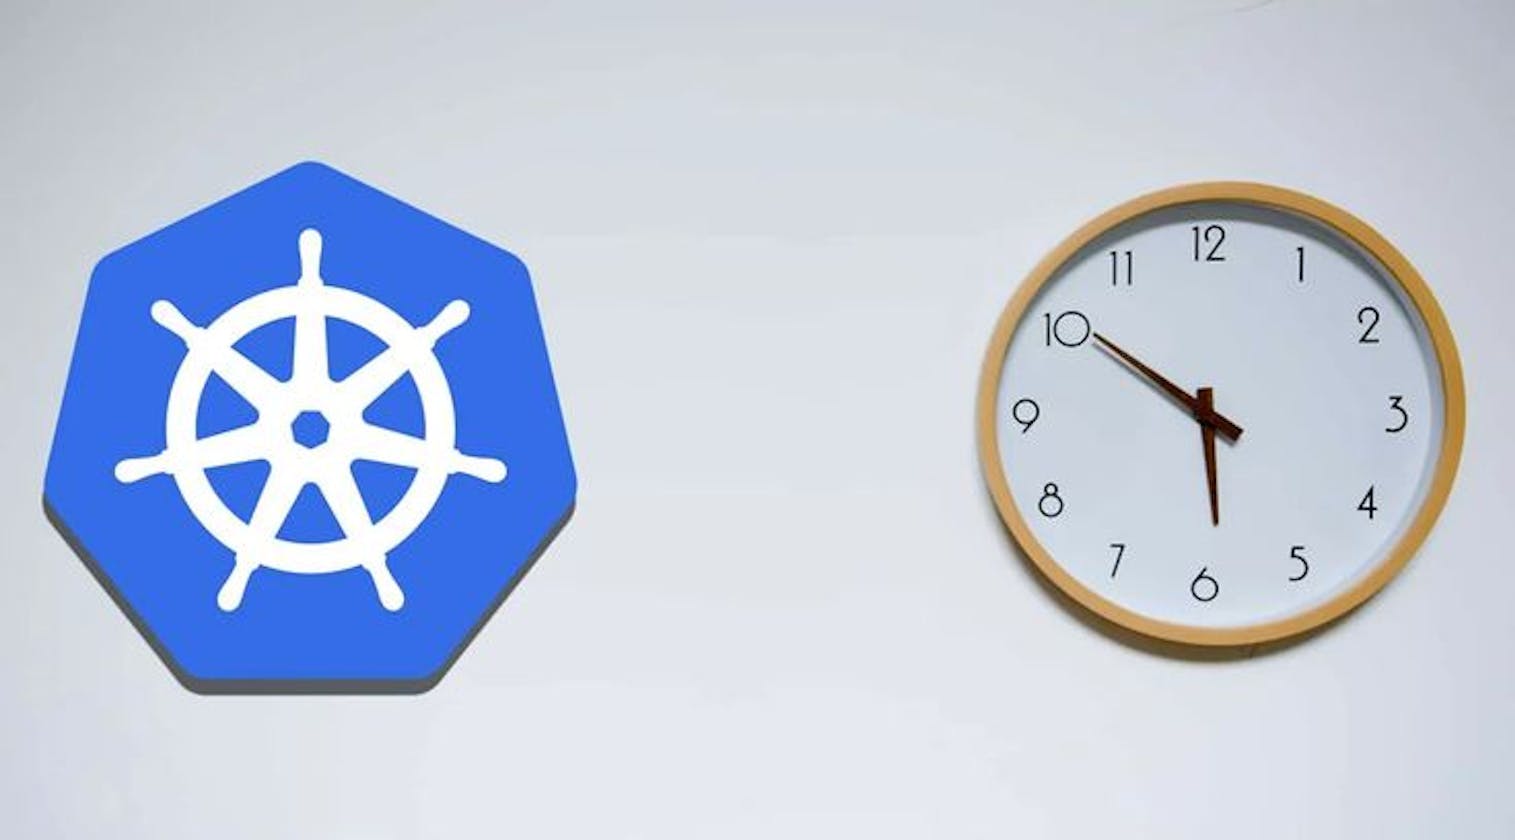 Monitoring and Logging in Kubernetes